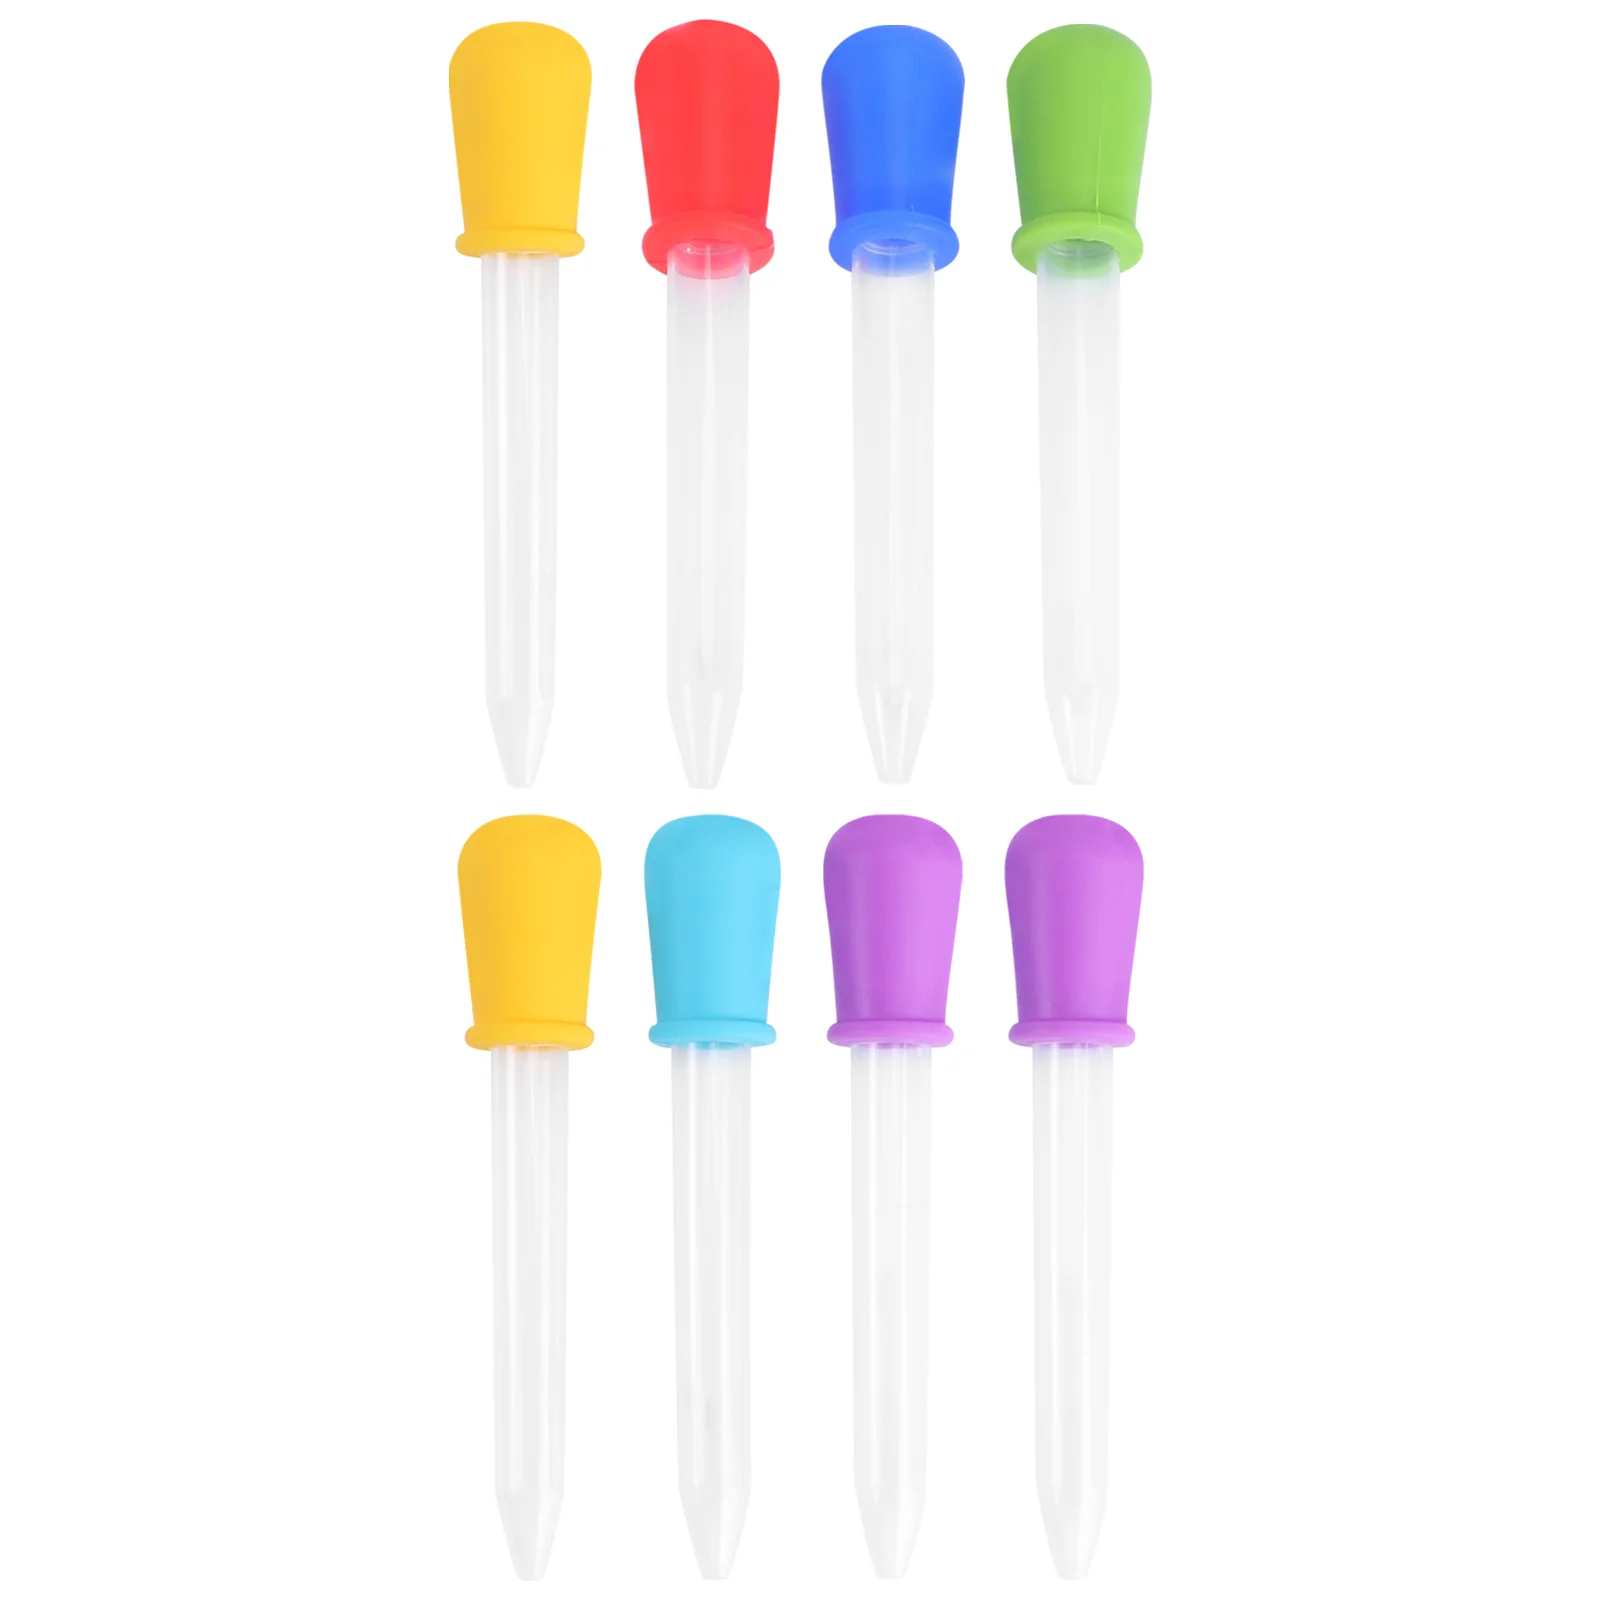 

6/8Pcs Random Eye Dropper Plastic Water Droppers for Kids Candy Maker Droppers Droppers Pipettes Silicone Droppers Eye Droppers